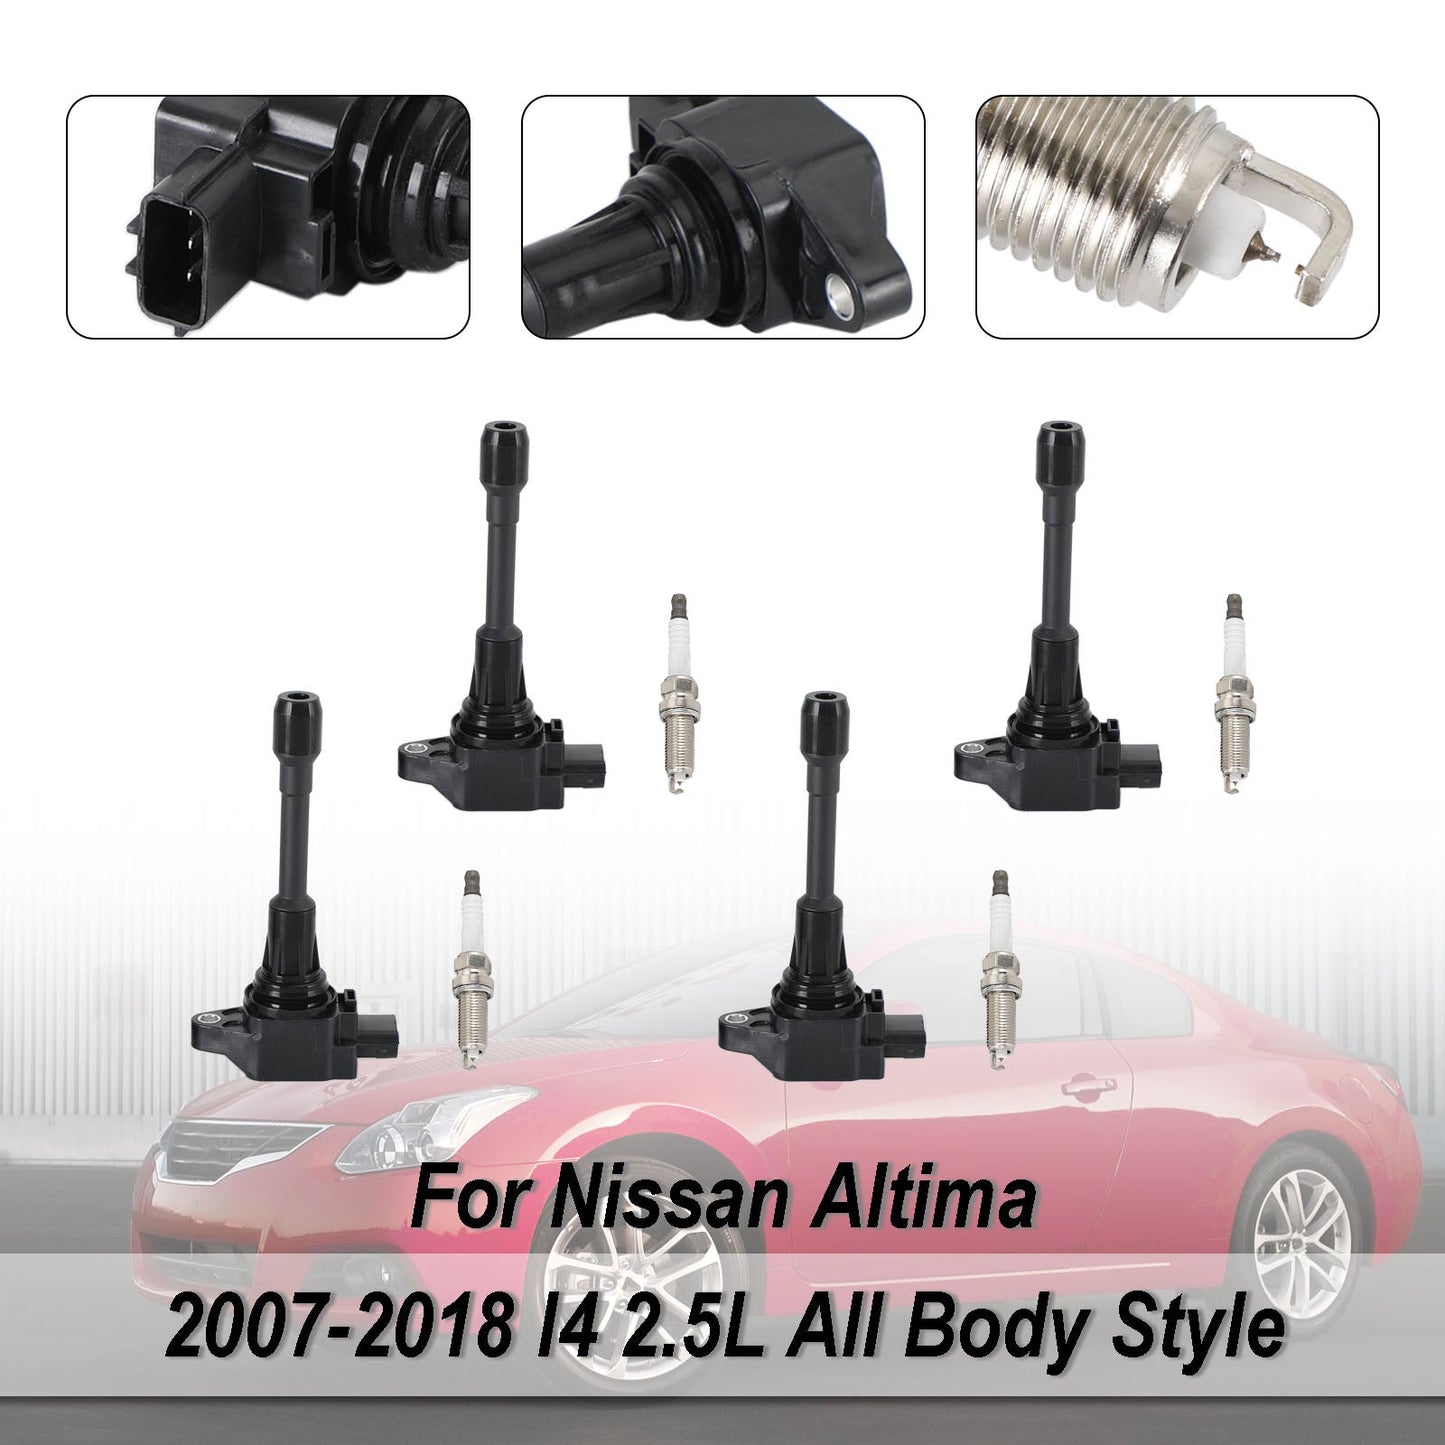 4PCS Ignition Coils Pack For Nissan Altima Sentra Rogue X-Trail Tiida 2.5L UF549